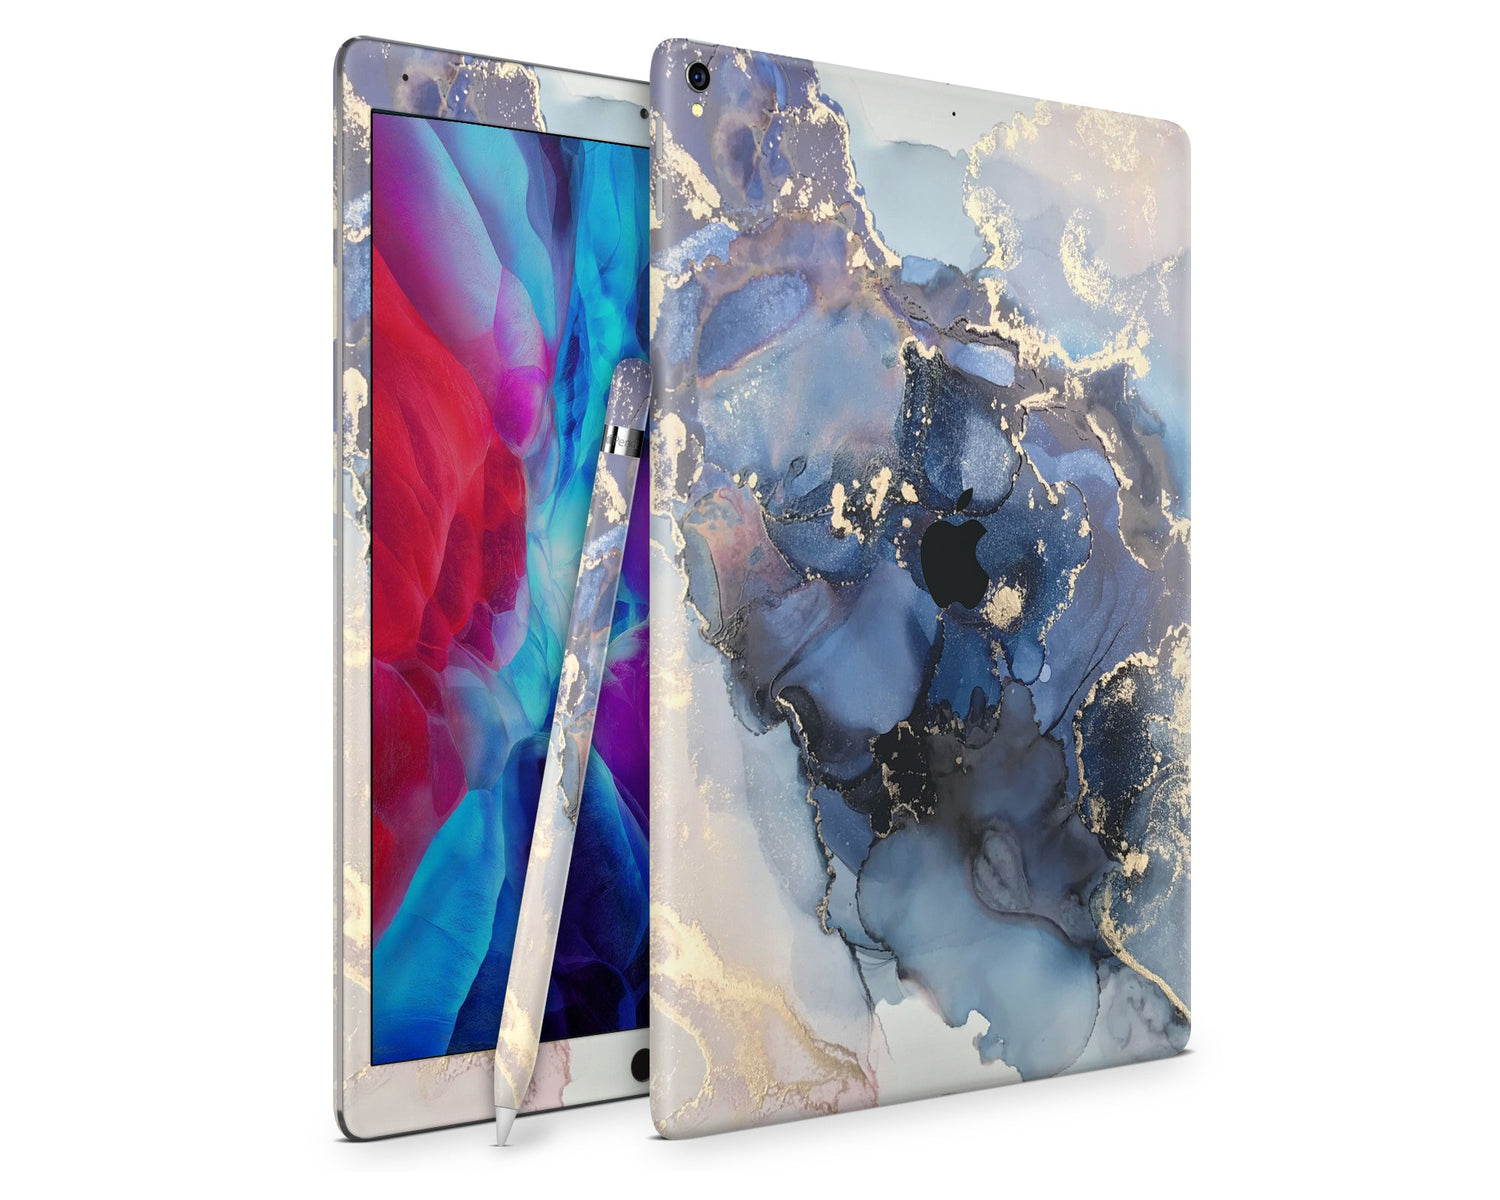 Lux Skins iPad Ethereal Blue Gold Marble iPad Pro 12.9" Gen 5 Skins - Pattern Marble Skin